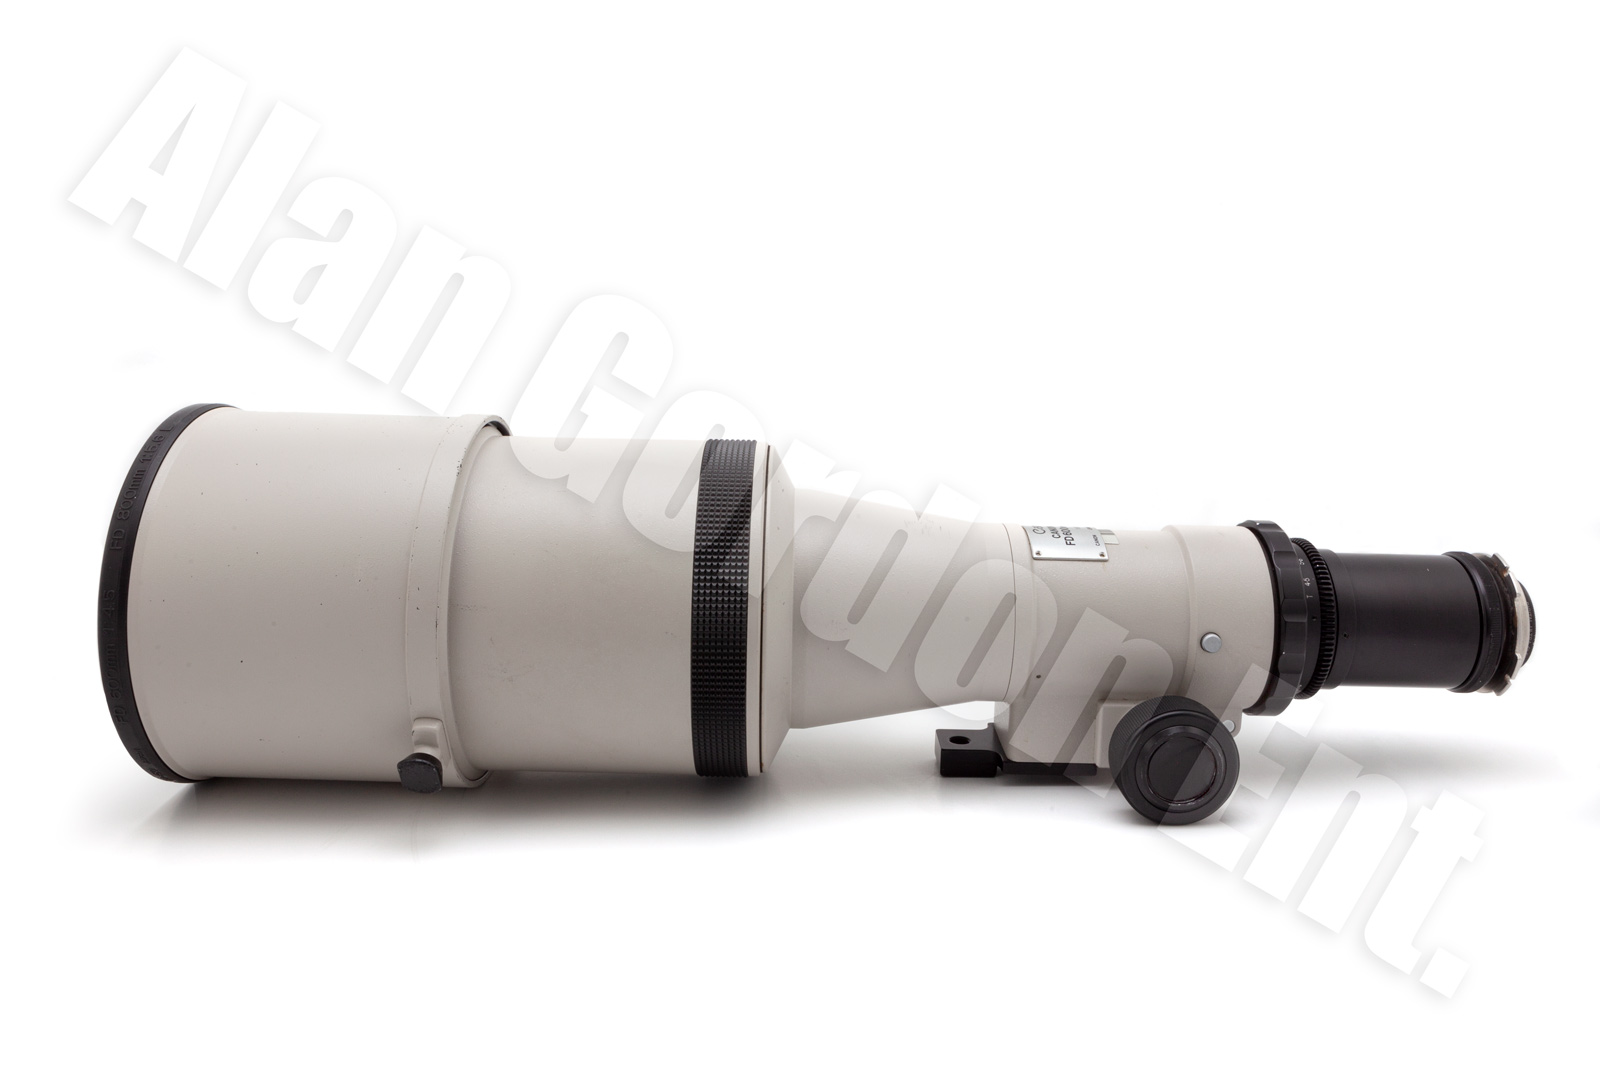 Canon FD 600mm f/4.5 Telephoto Prime Lens - Side View